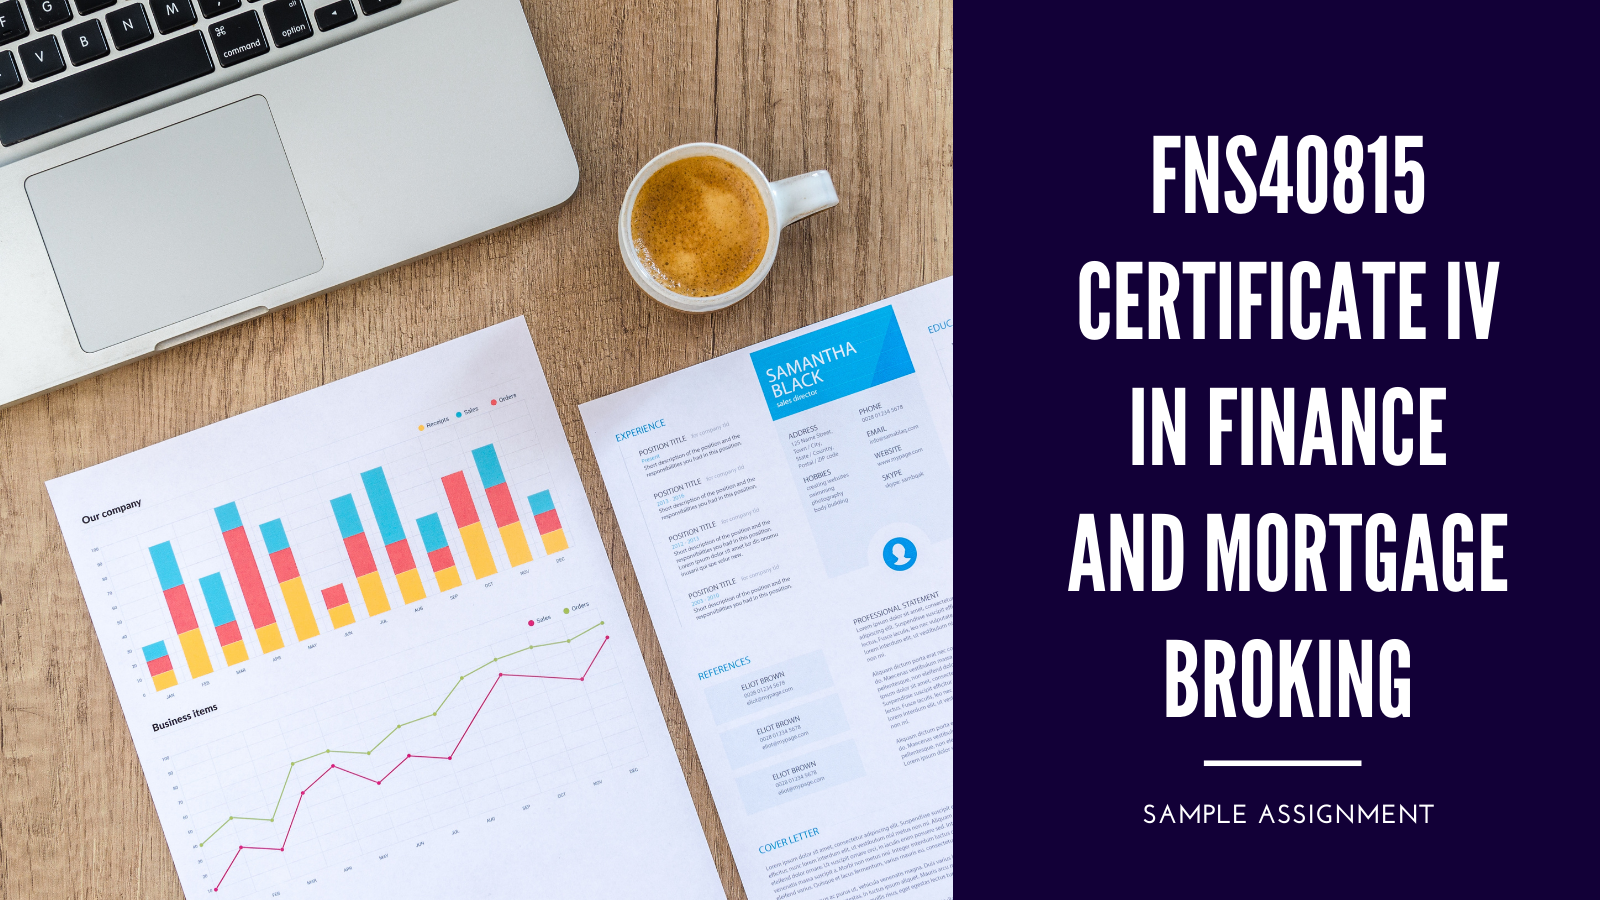 FNS40815 Certificate IV in Finance and Mortgage Broking Assessment Answer